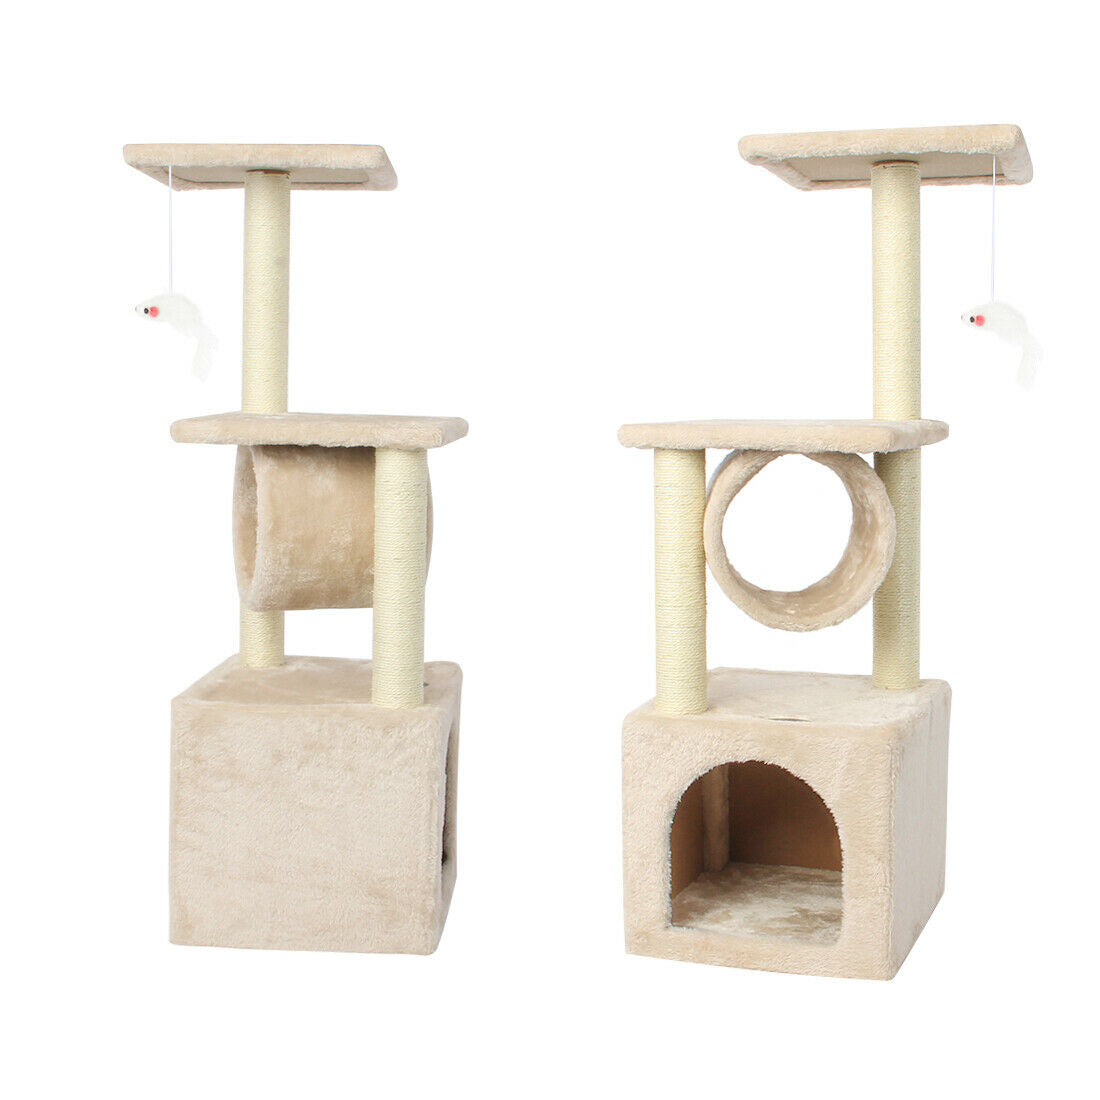 36'' Cat Tree Scratching Tower Post Condo Pet House Scratcher Furniture Bed New